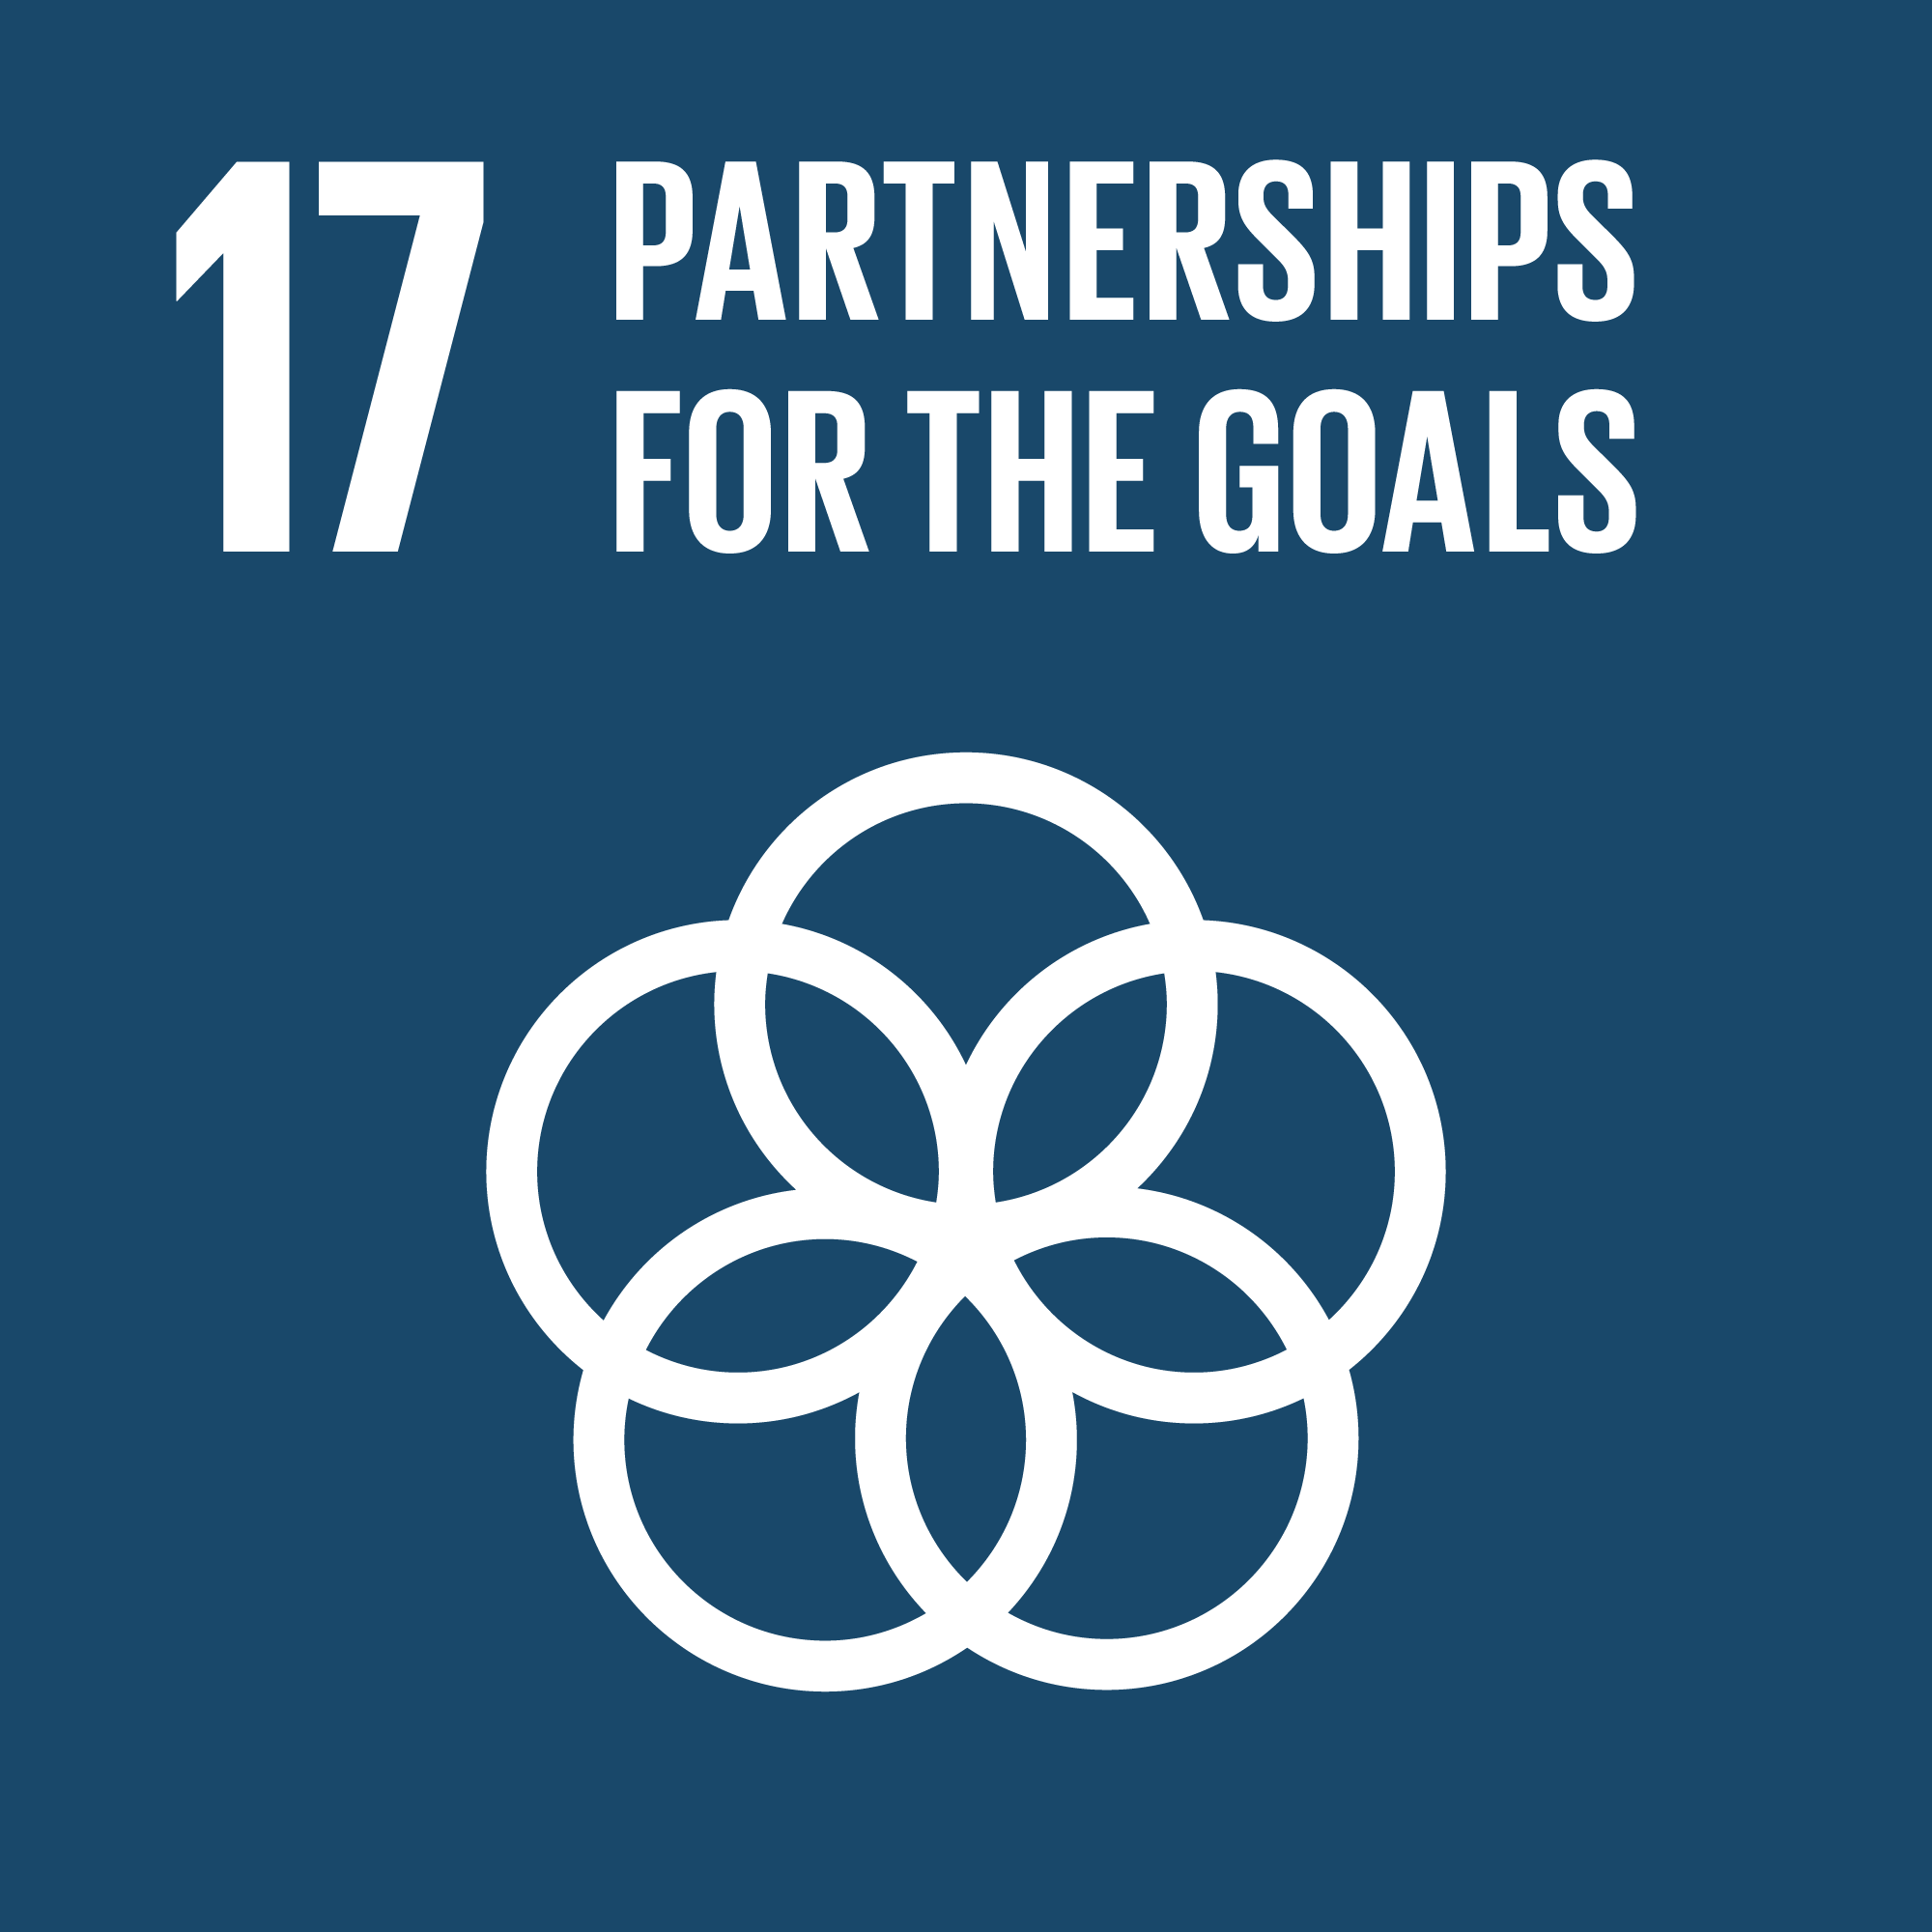  Goal 17: Partnerships for the Goals - Strengthen the means of implementation and revitalize the Global Partnership for Sustainable Development